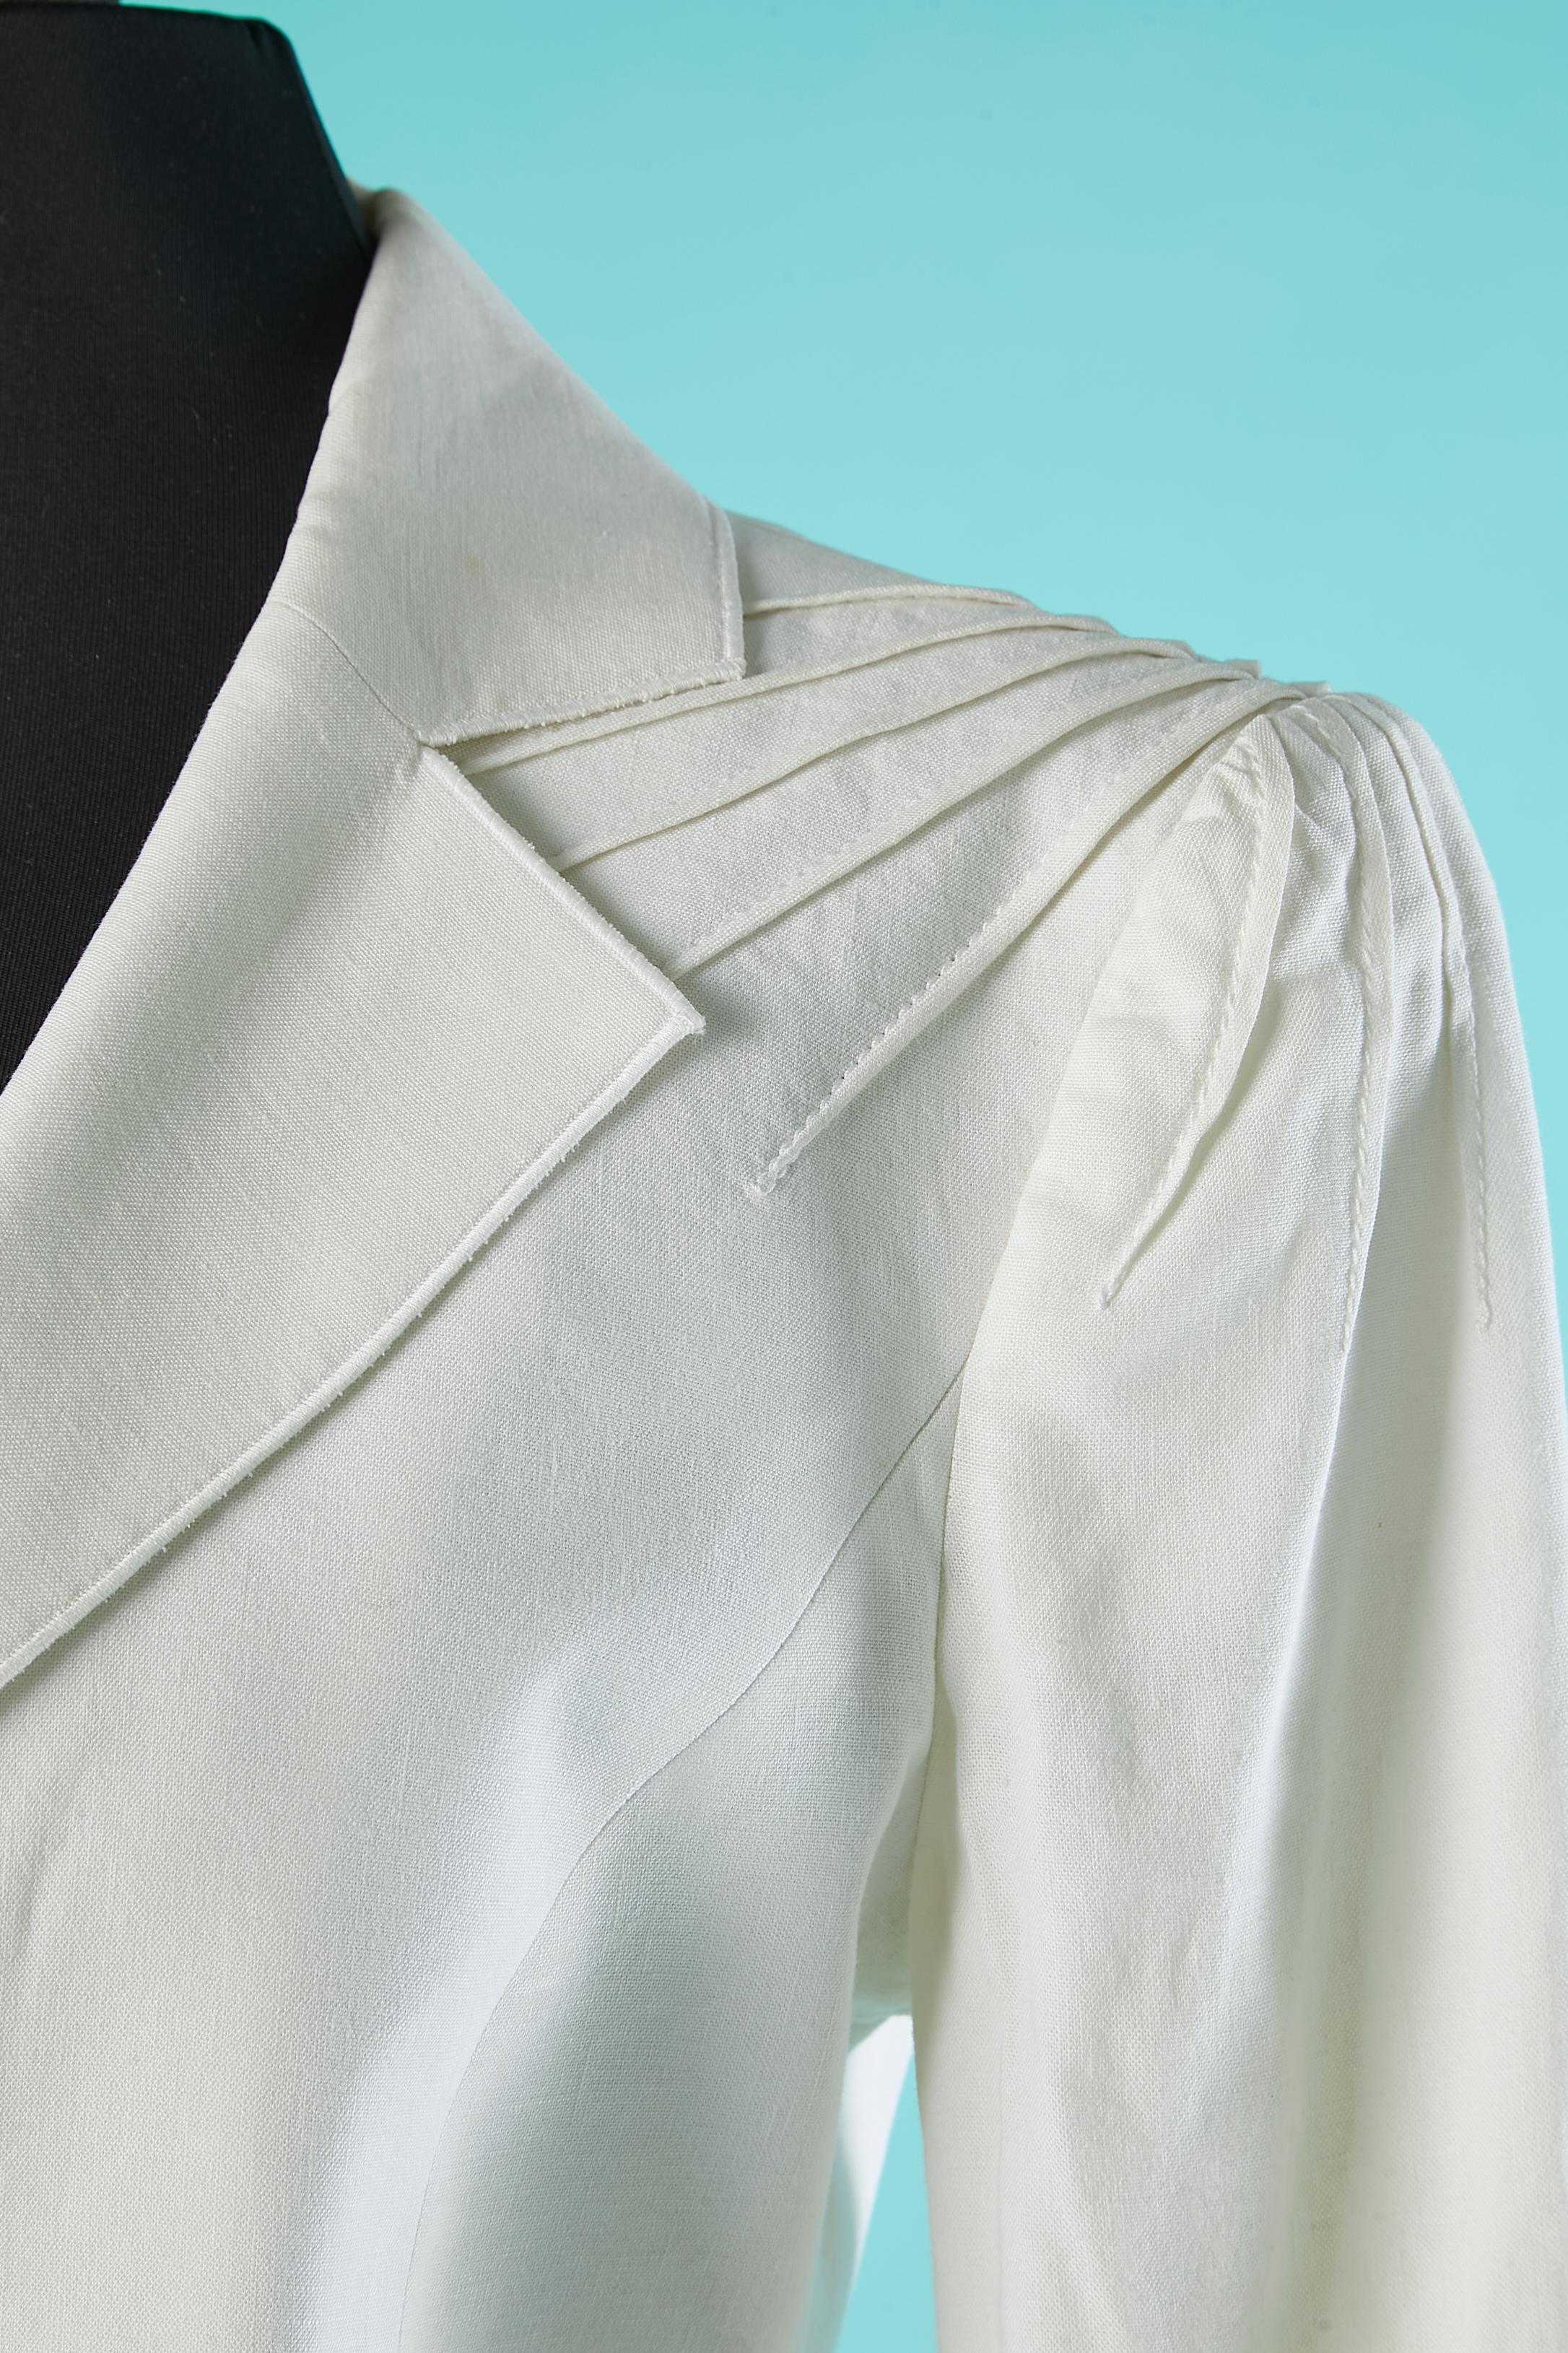 White linen jacket with top stitched shoulders and sleeve head. No fabric tag but for sure it's linen. Lining could be polyester or rayon. 
One button closure in the middle front and 3 buttons on each cuffs. 
SIZE M 